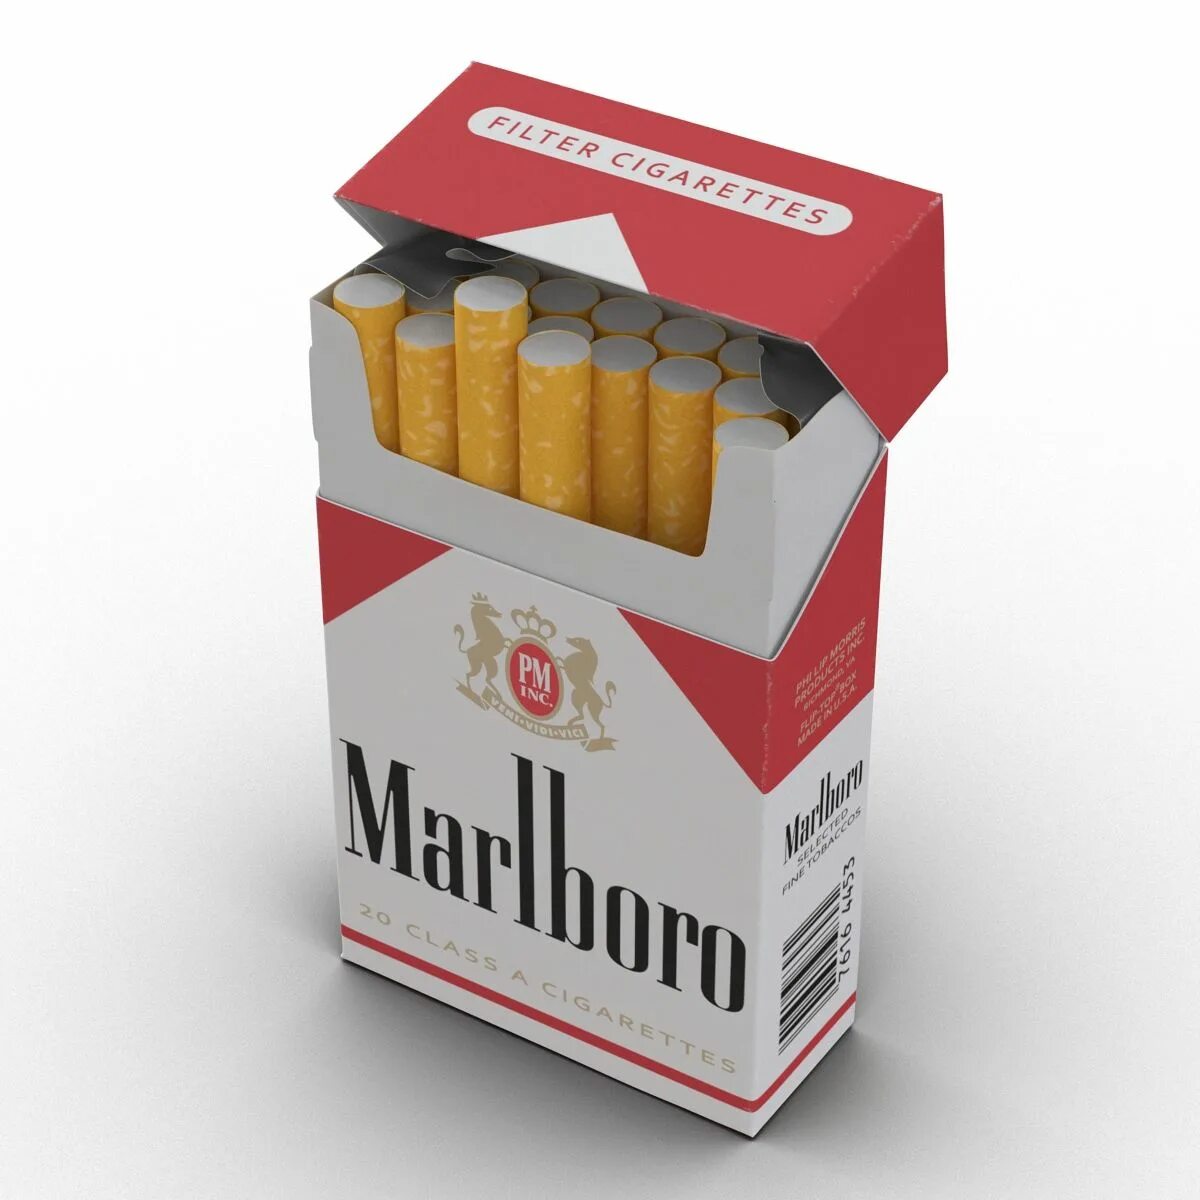 Мальбора. Пачка сигарет Мальборо. Сигареты Marlboro. Пачка Marlboro. Упаковка сигарет Мальборо.